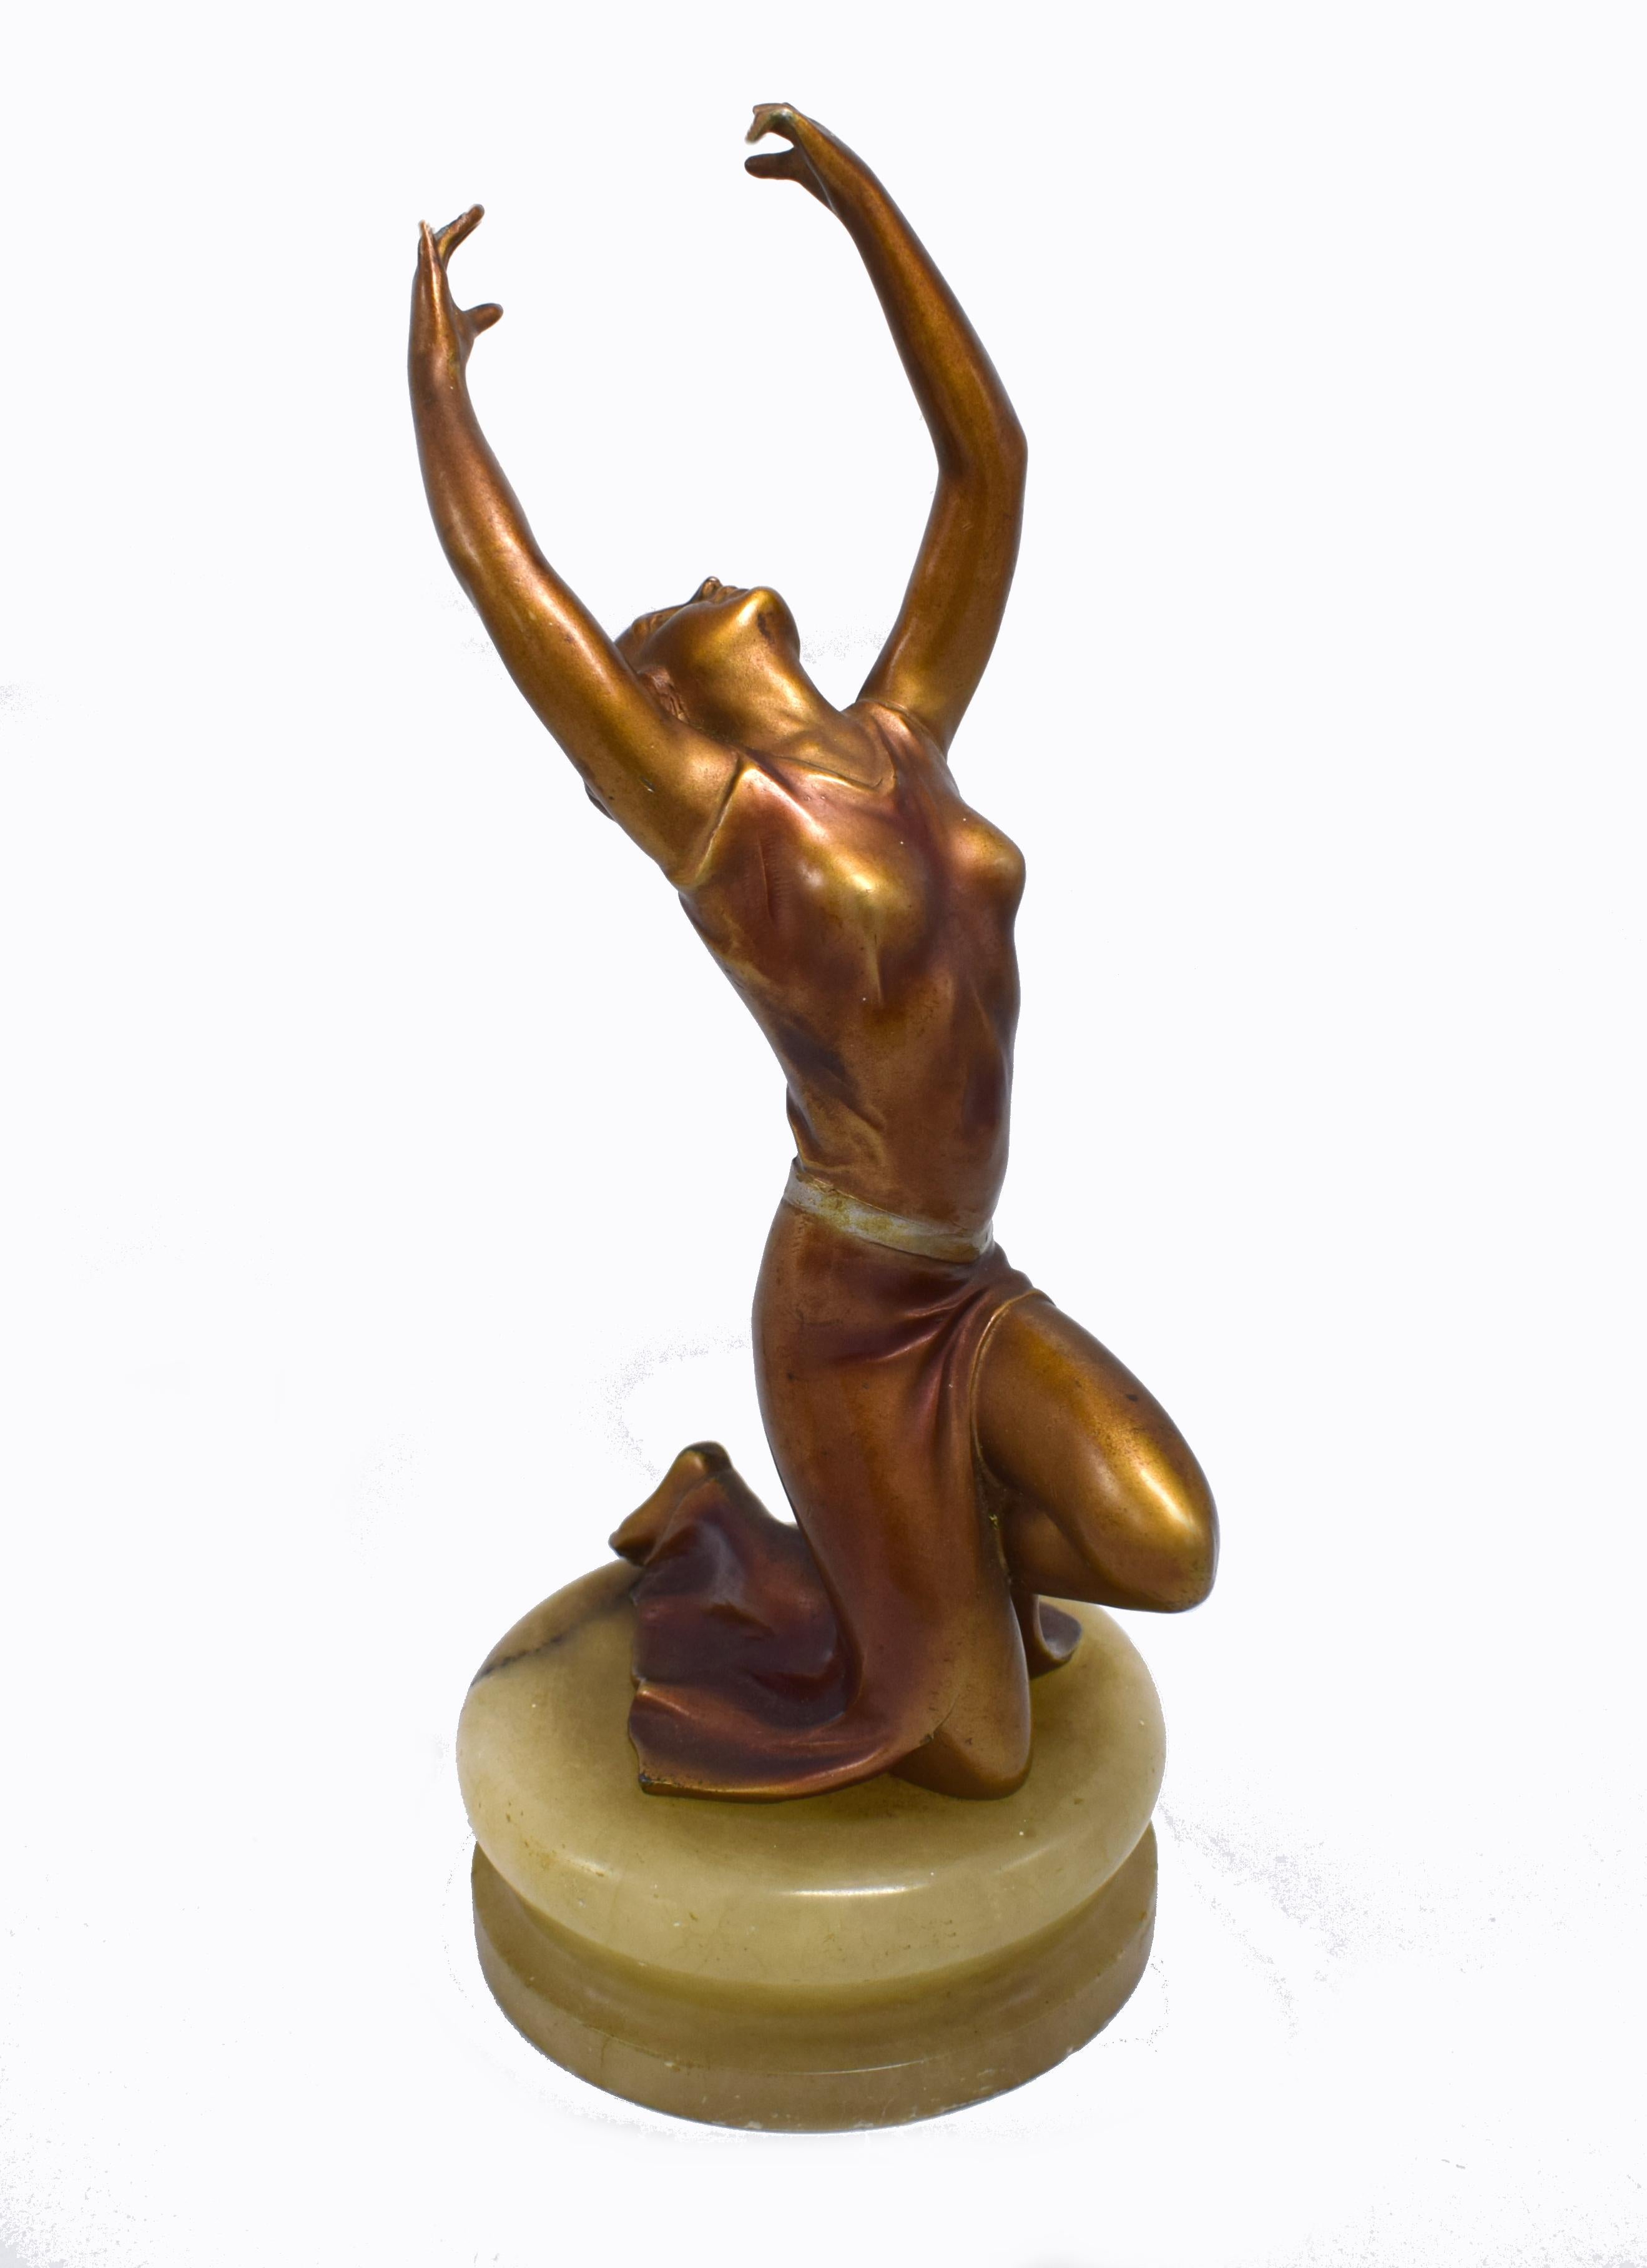 Delightful and totally authentic 1930s Art Deco cold painted spelter female figure resting on a solid Onyx base. Very well executed with fabulous detailing and colours. Quite weighty piece and of good quality, sourced in Europe. The condition is